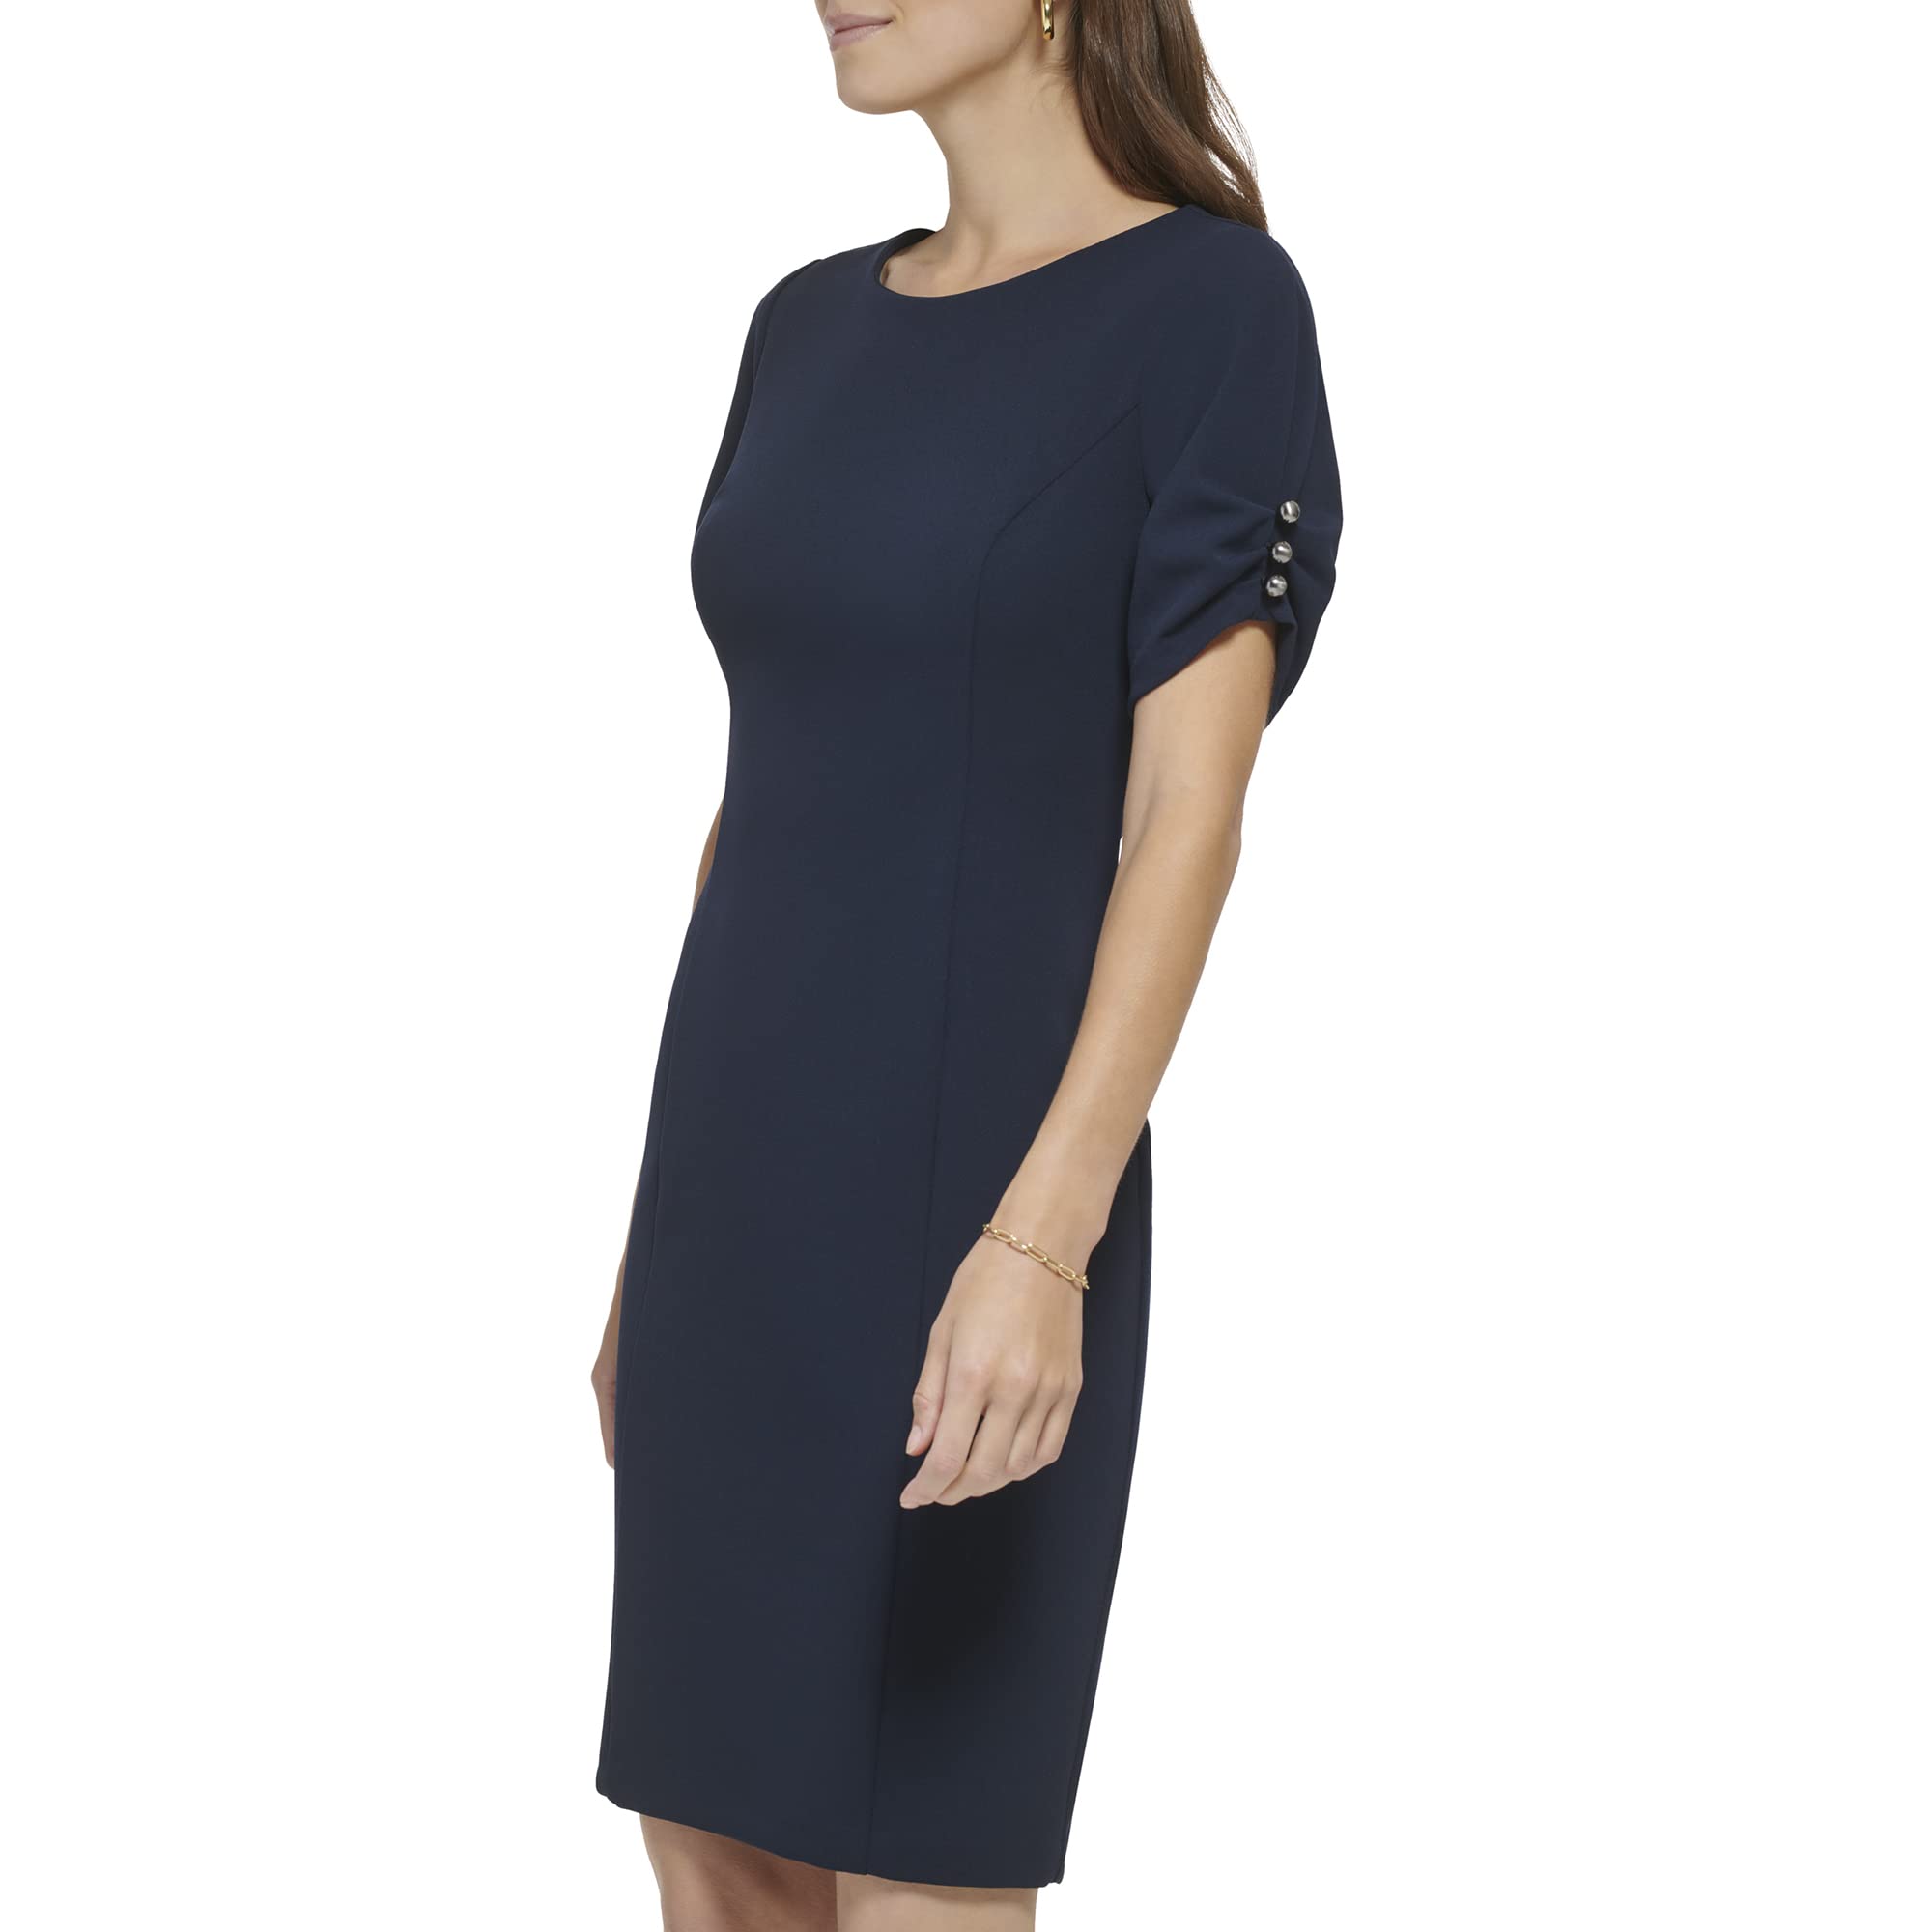 DKNY Women's Rouched Sleeve Pearl Button Dress